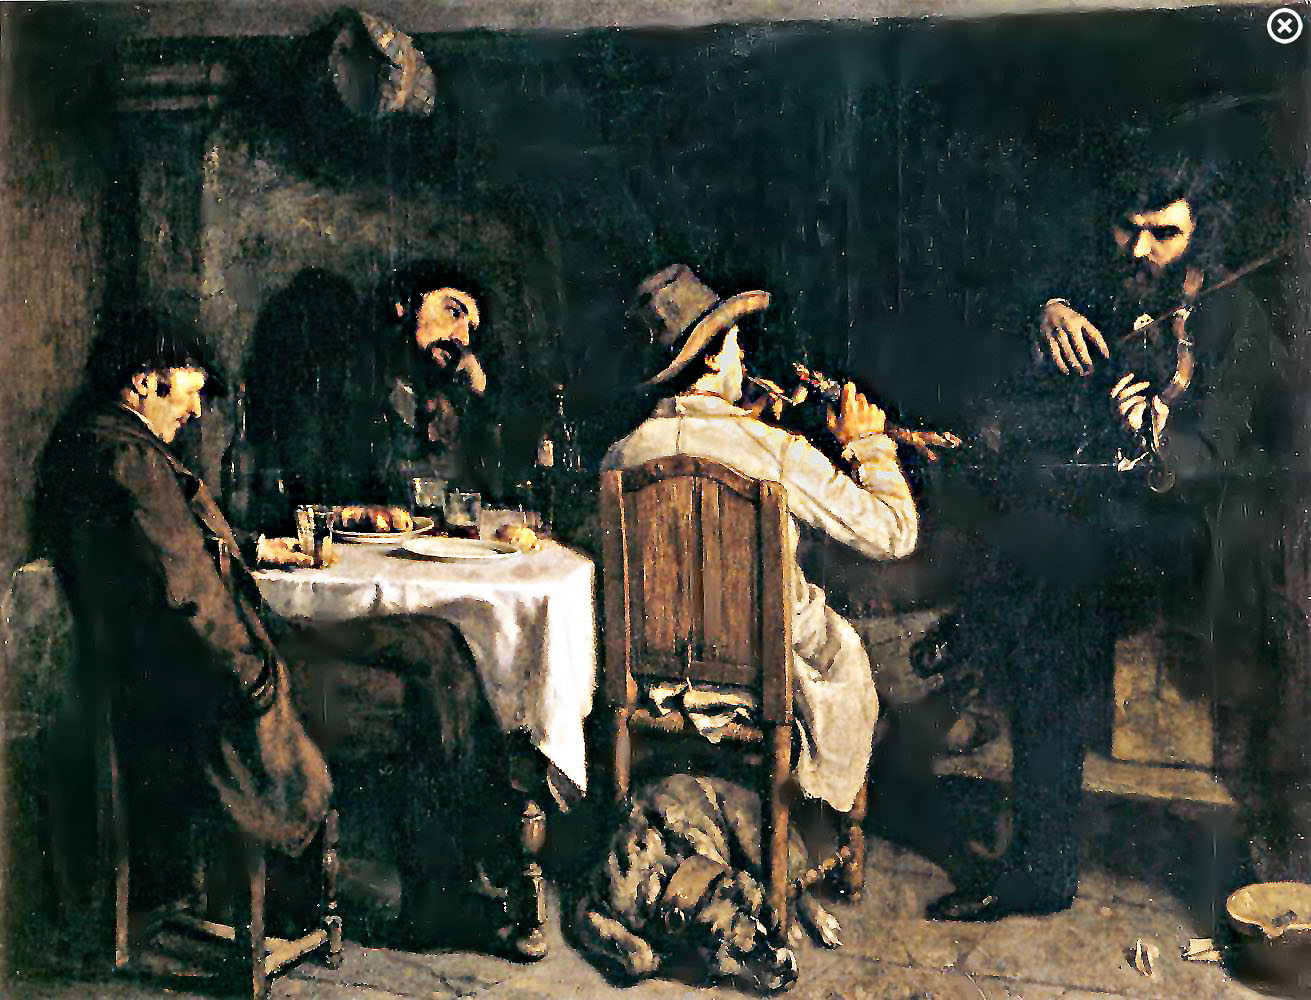 Gustave Courbet's After Dinner at Ornans